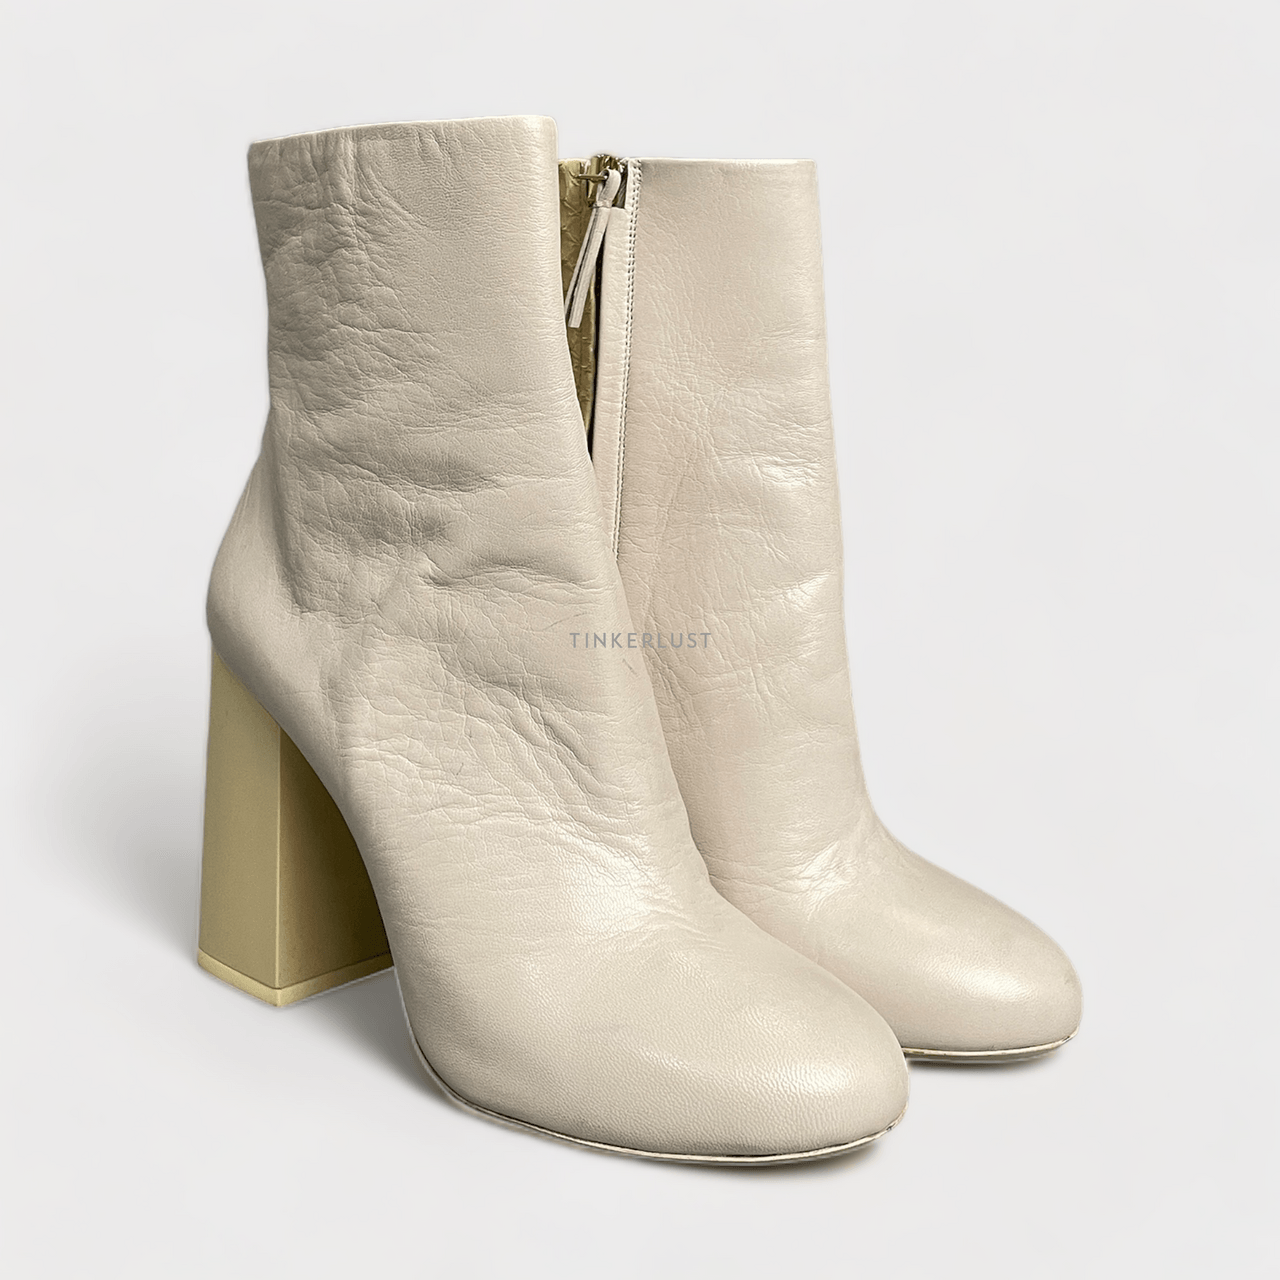 Paul Smith Ankle Boots Ivory Snakeskin Pumps